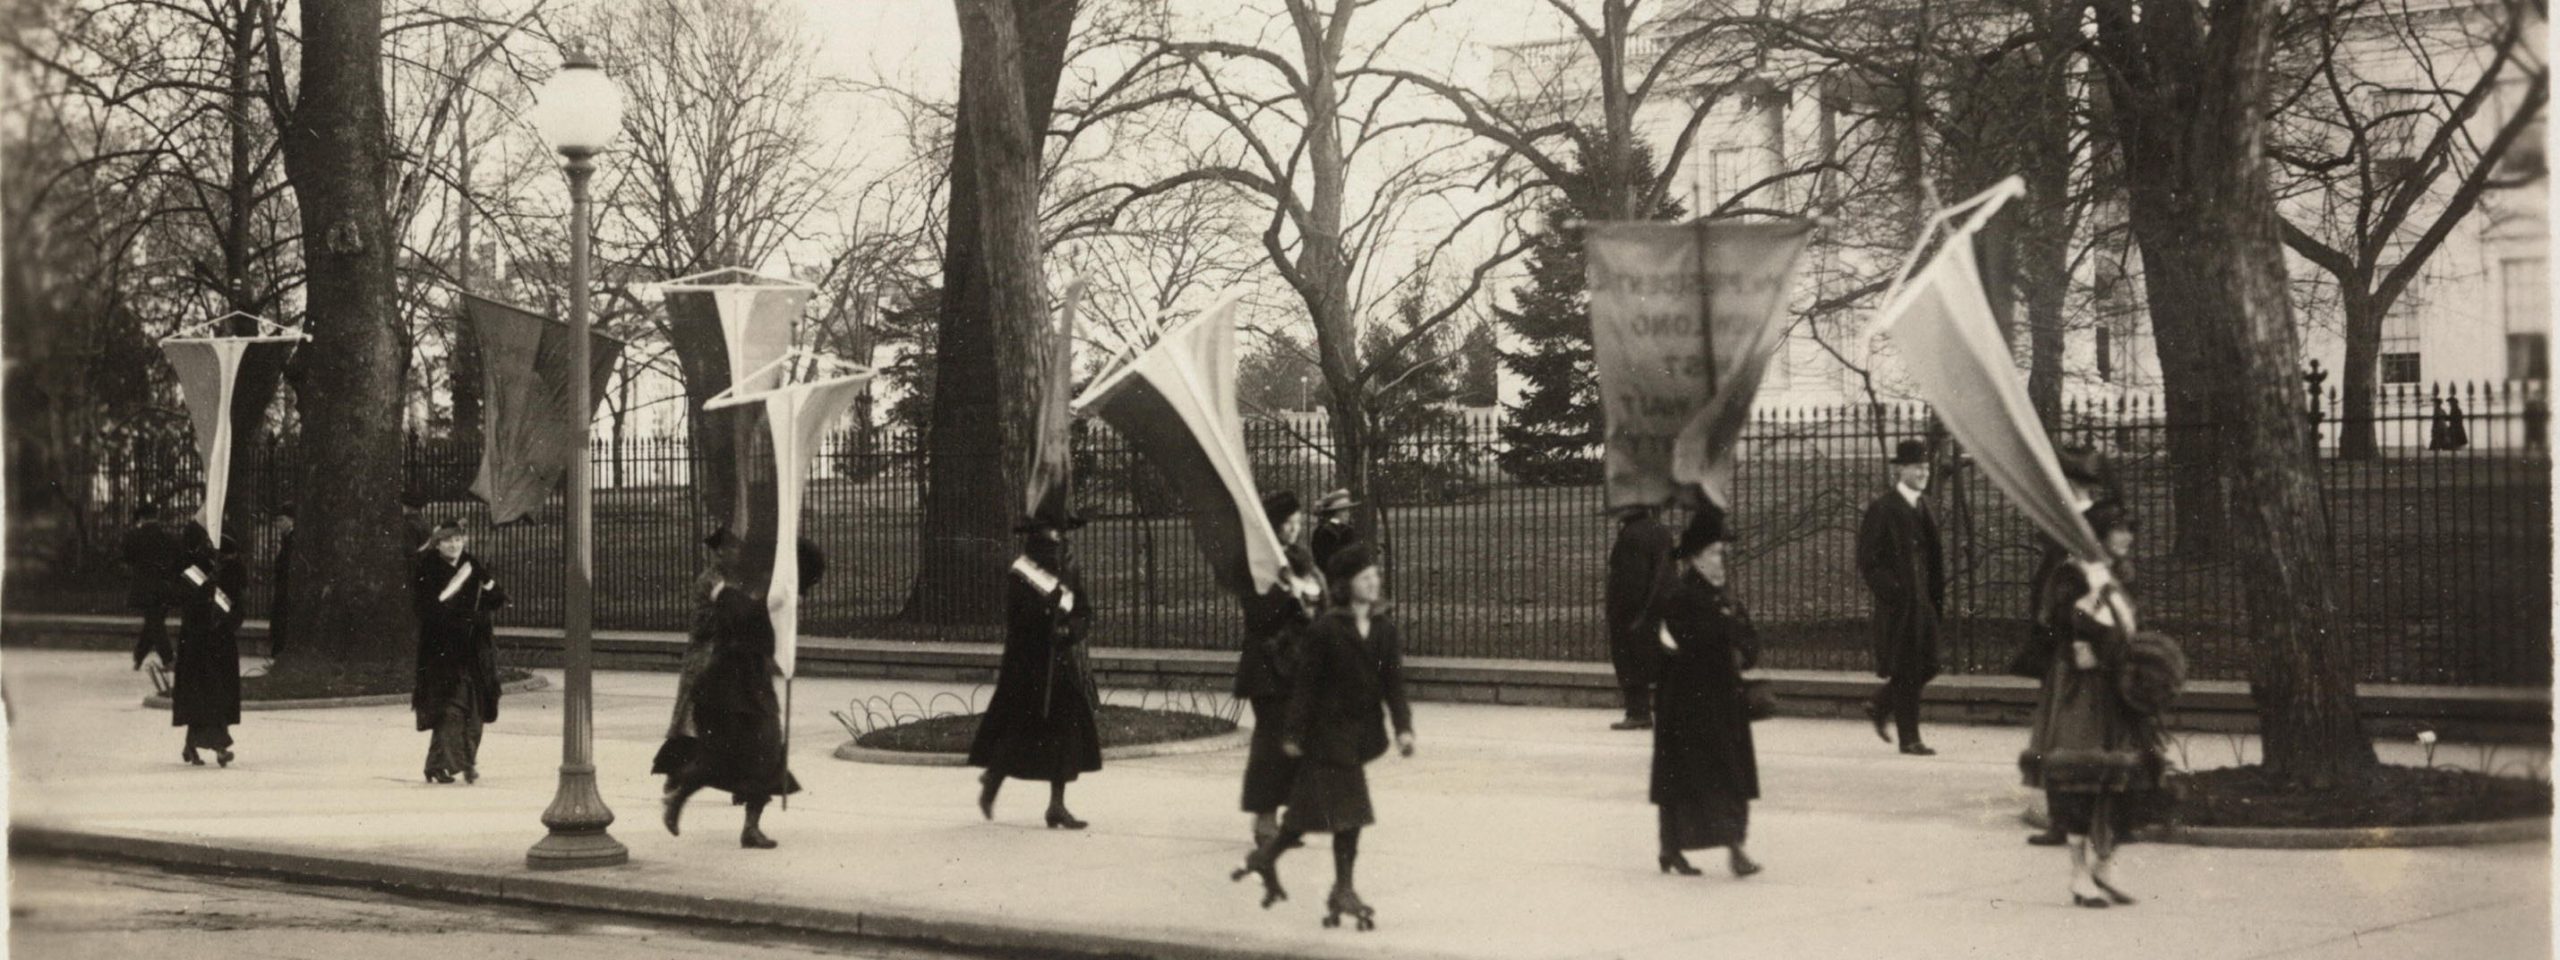 Women walk past the Whie House holding pro-suffrage flags and banners. One woman passes on roller skates.